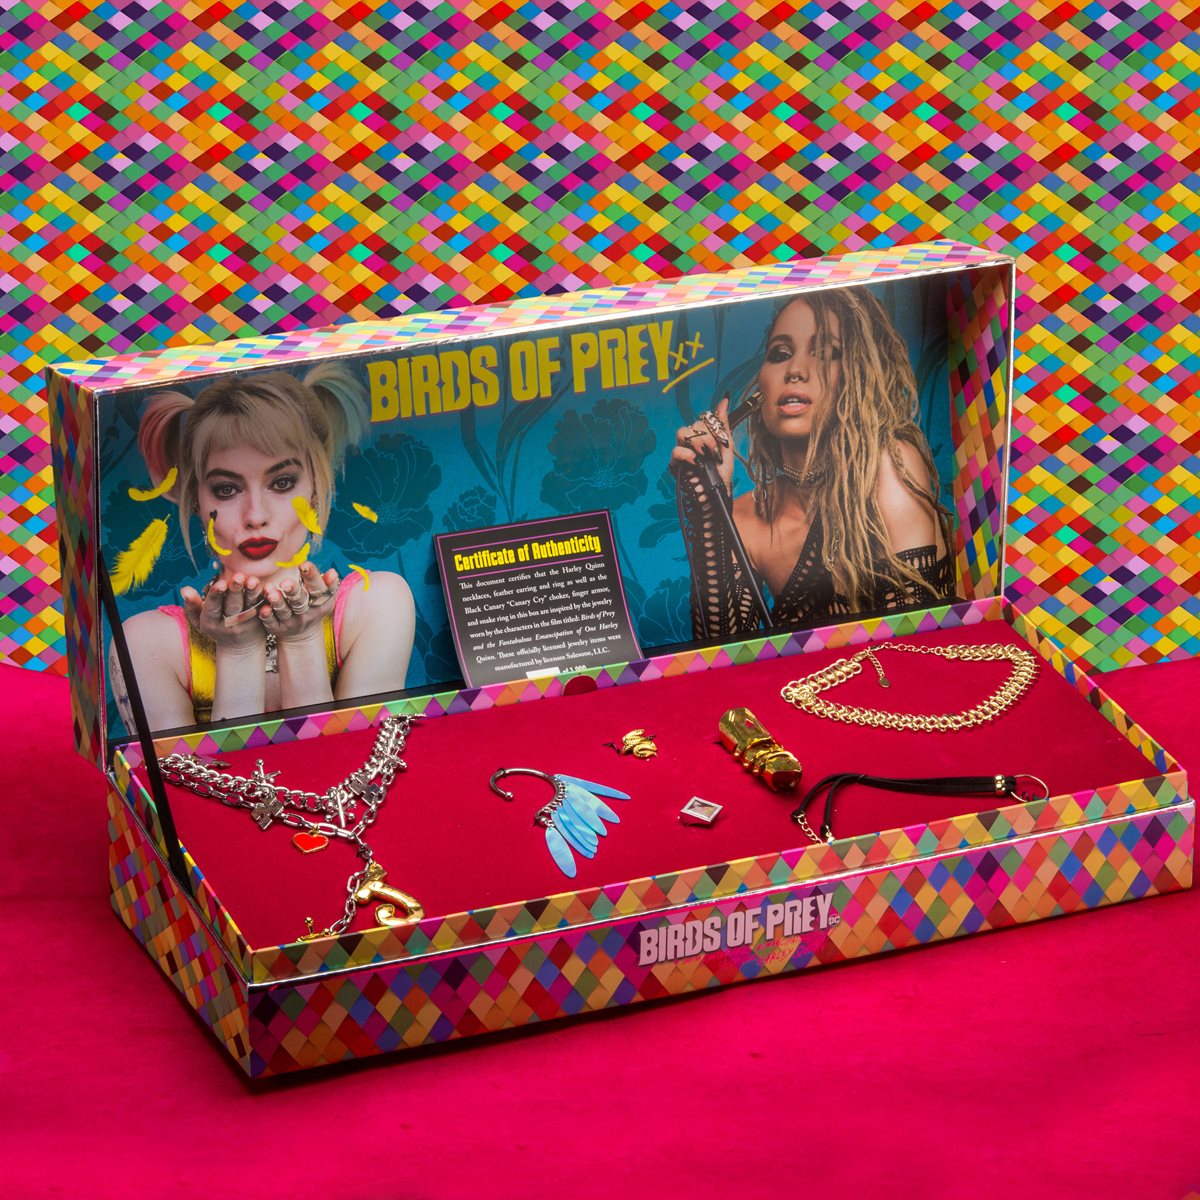 Harley Quinn Jewelry Kit for Adults - Birds of Prey